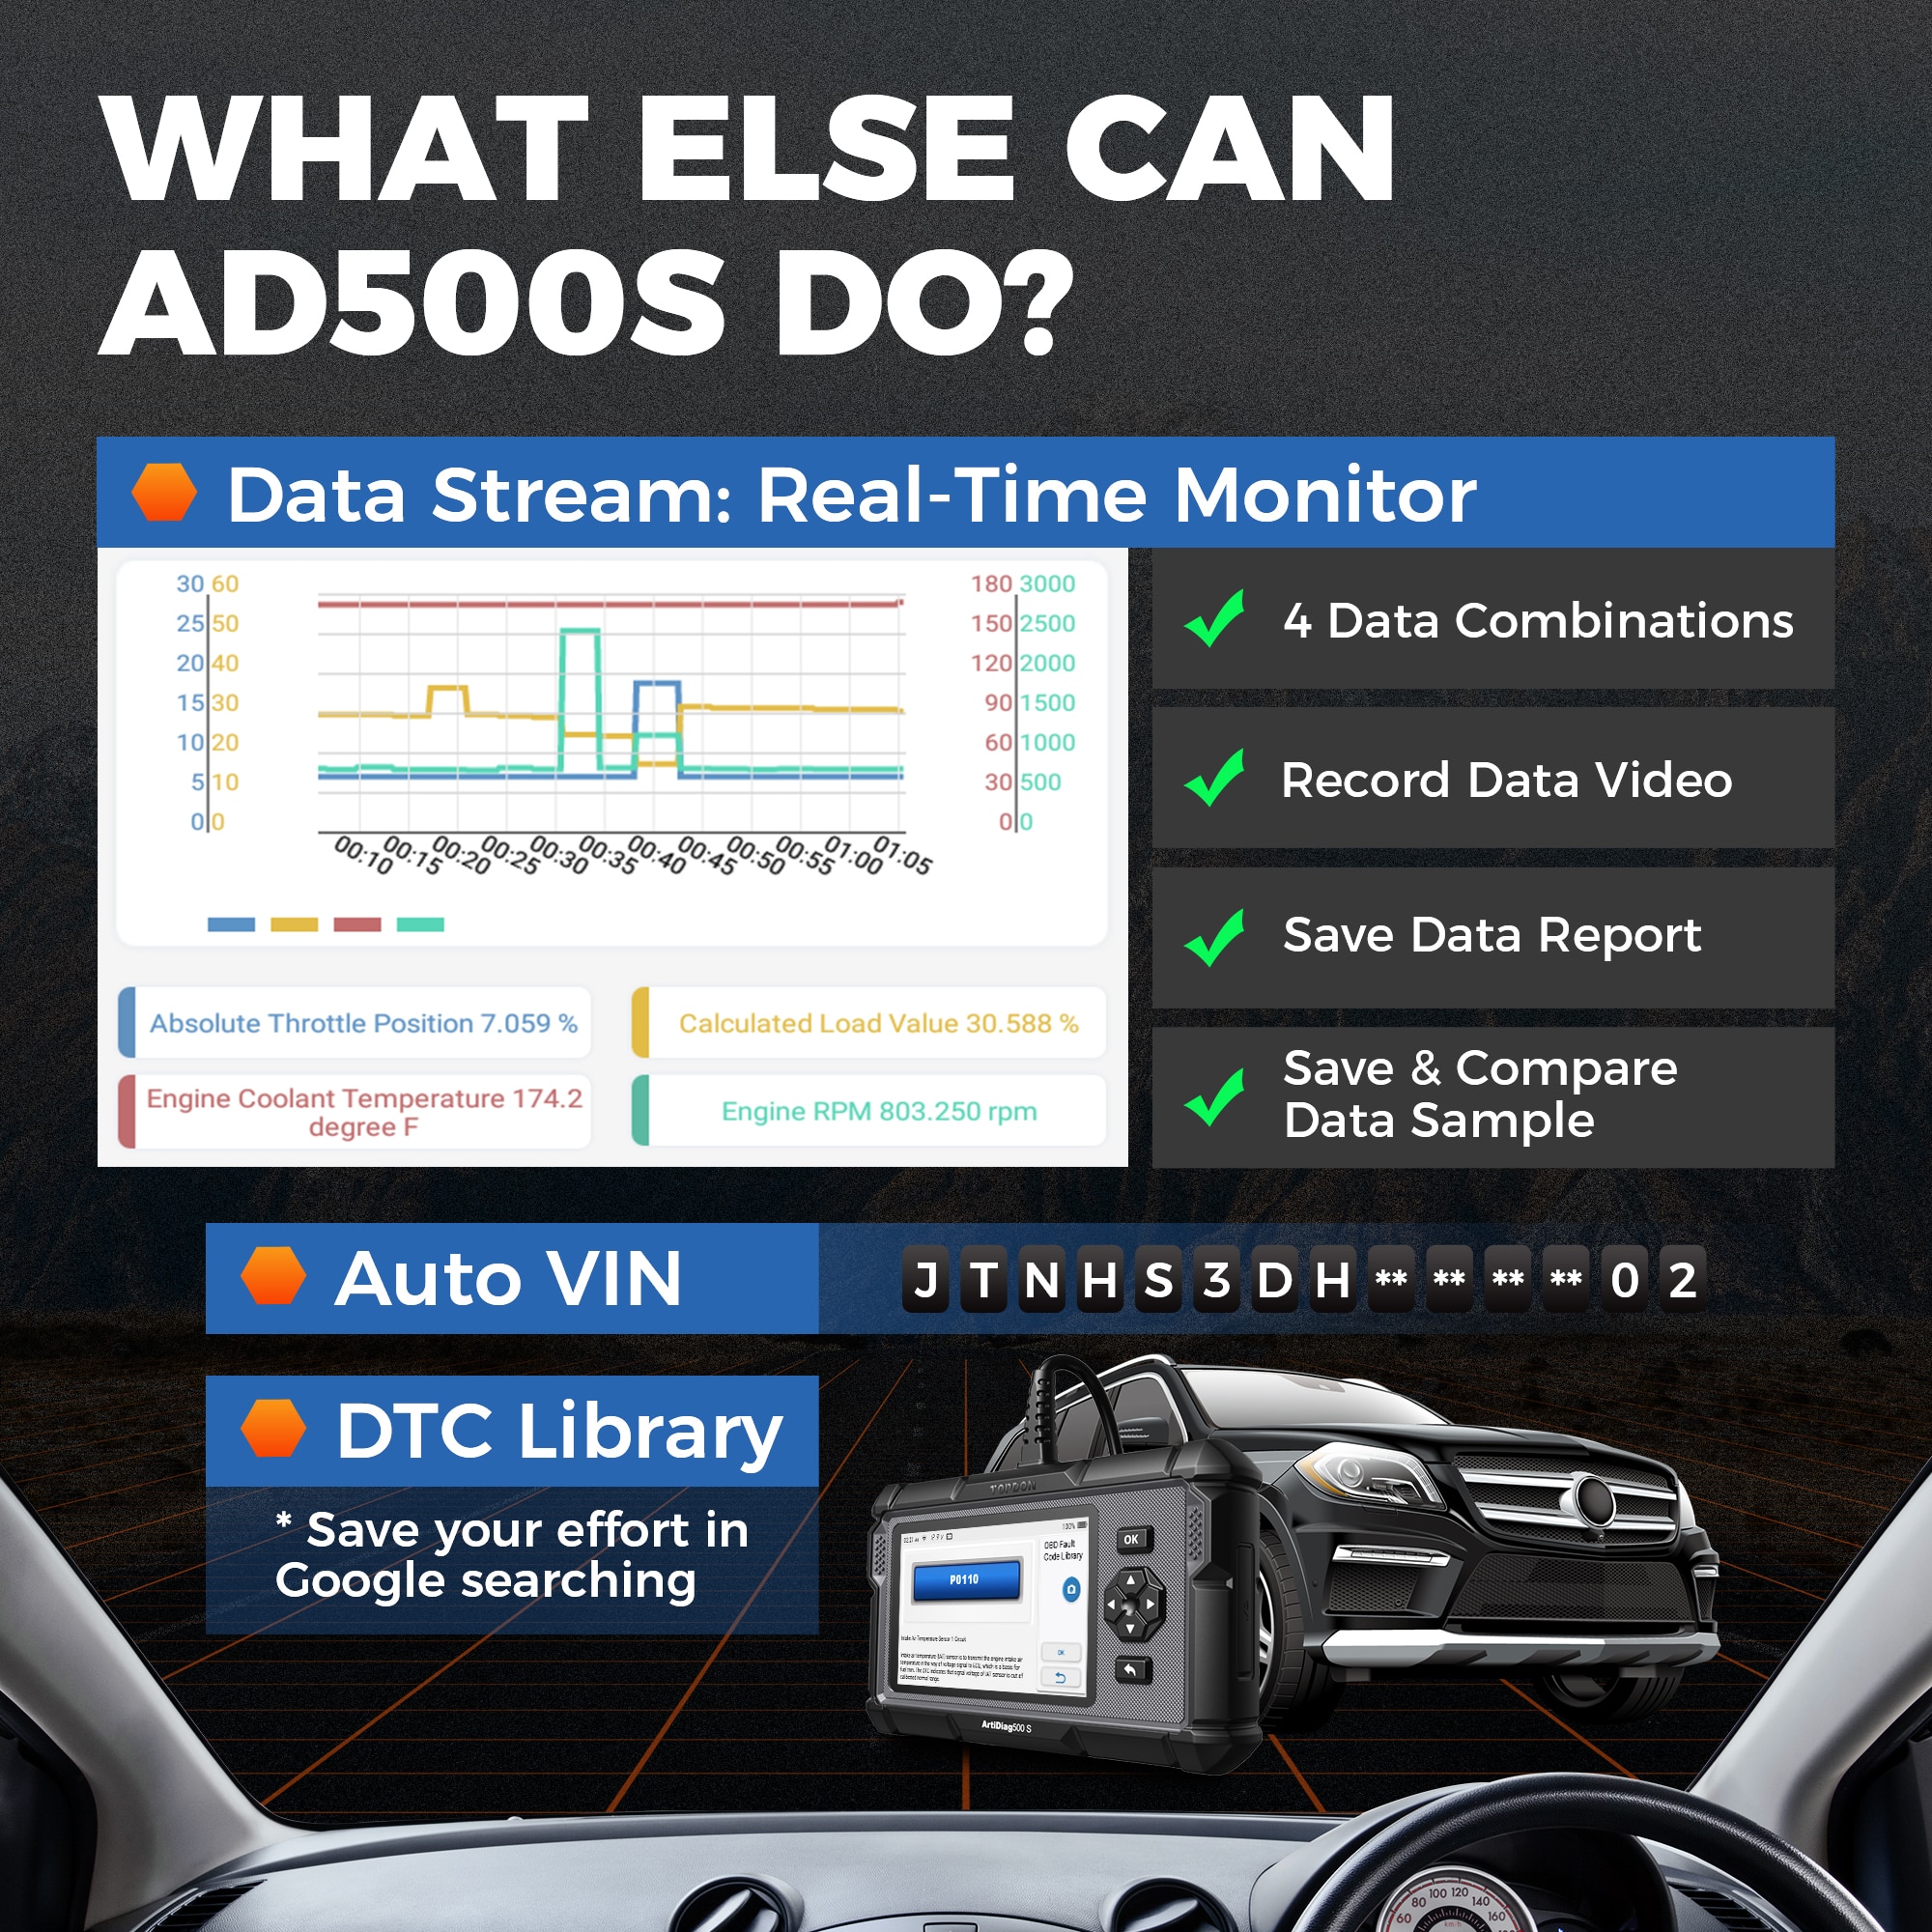 Topdon ArtiDiag500S OBD2 Diagnostic Scanner All Systems ABS Airbag DPF Oil Reset Automotive Diagnoses Tool